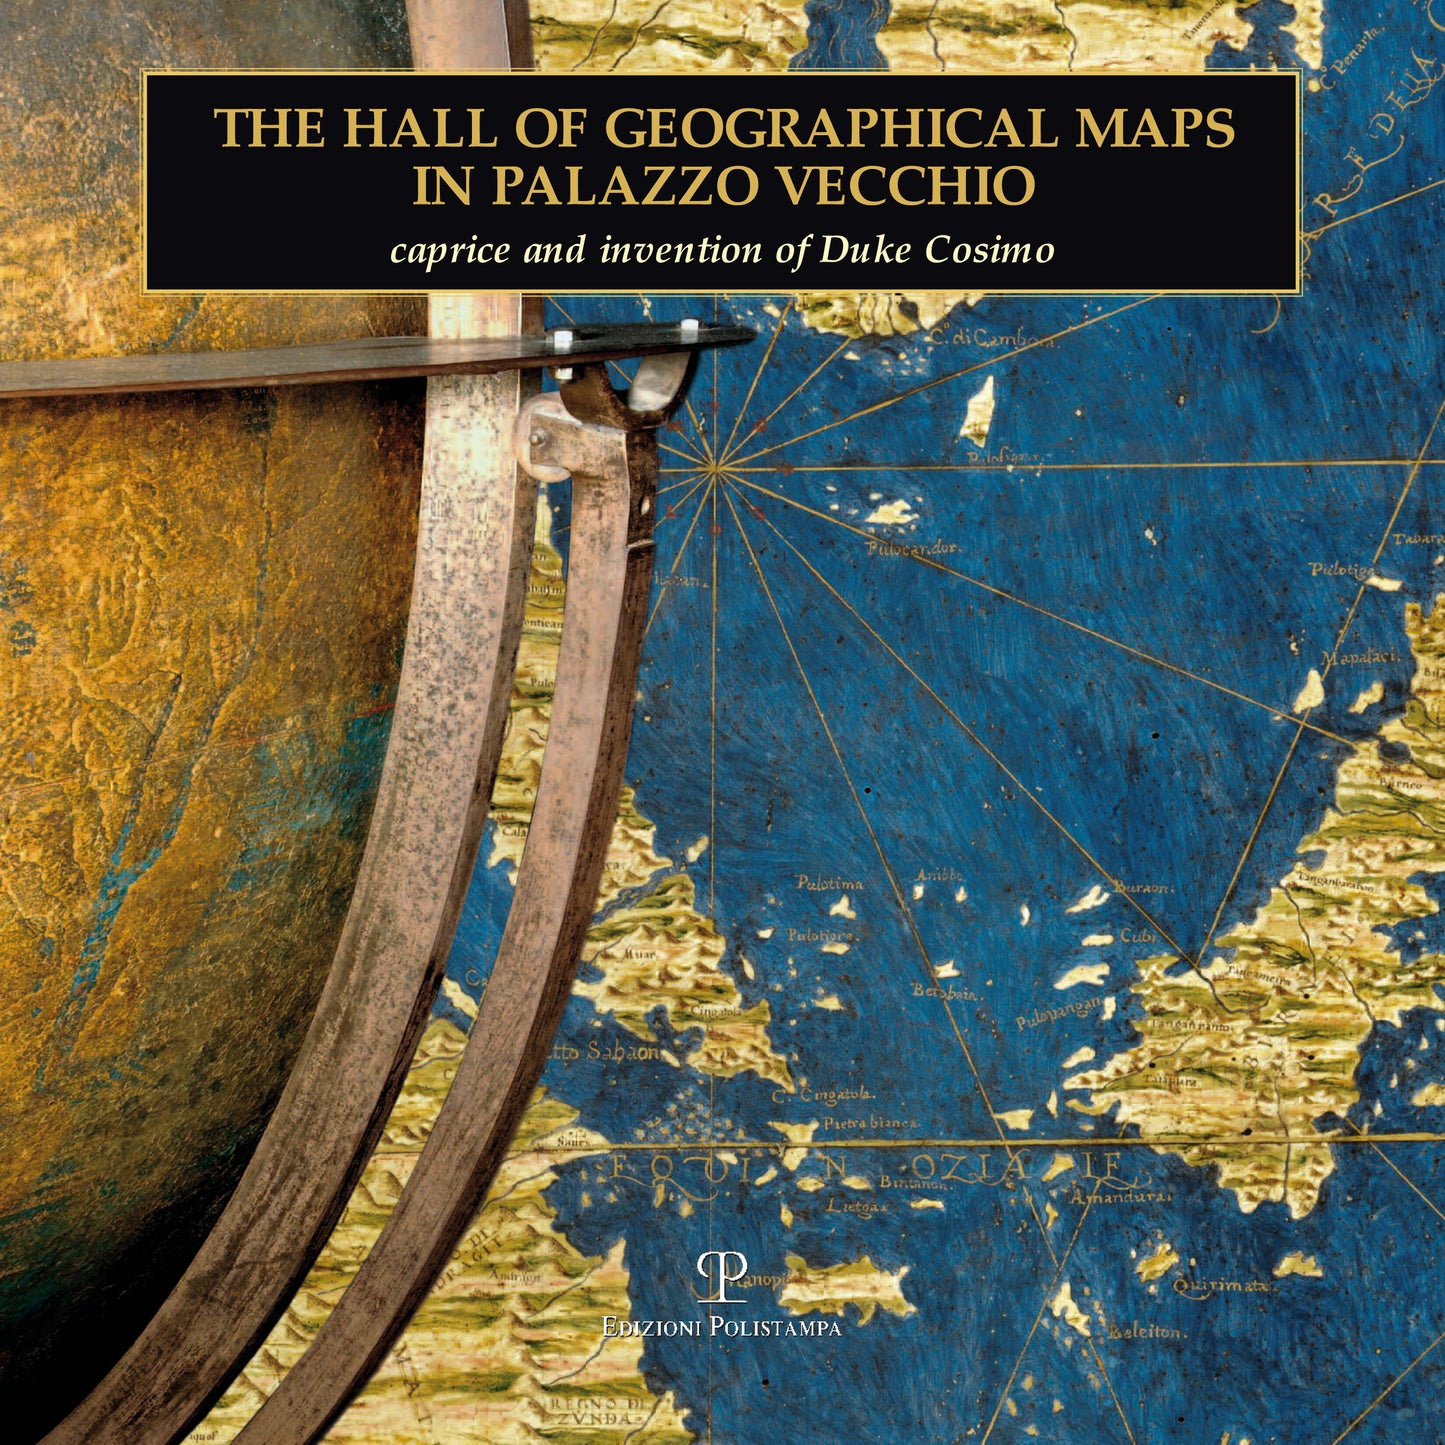 The Hall of Geographical Maps in Palazzo Vecchio